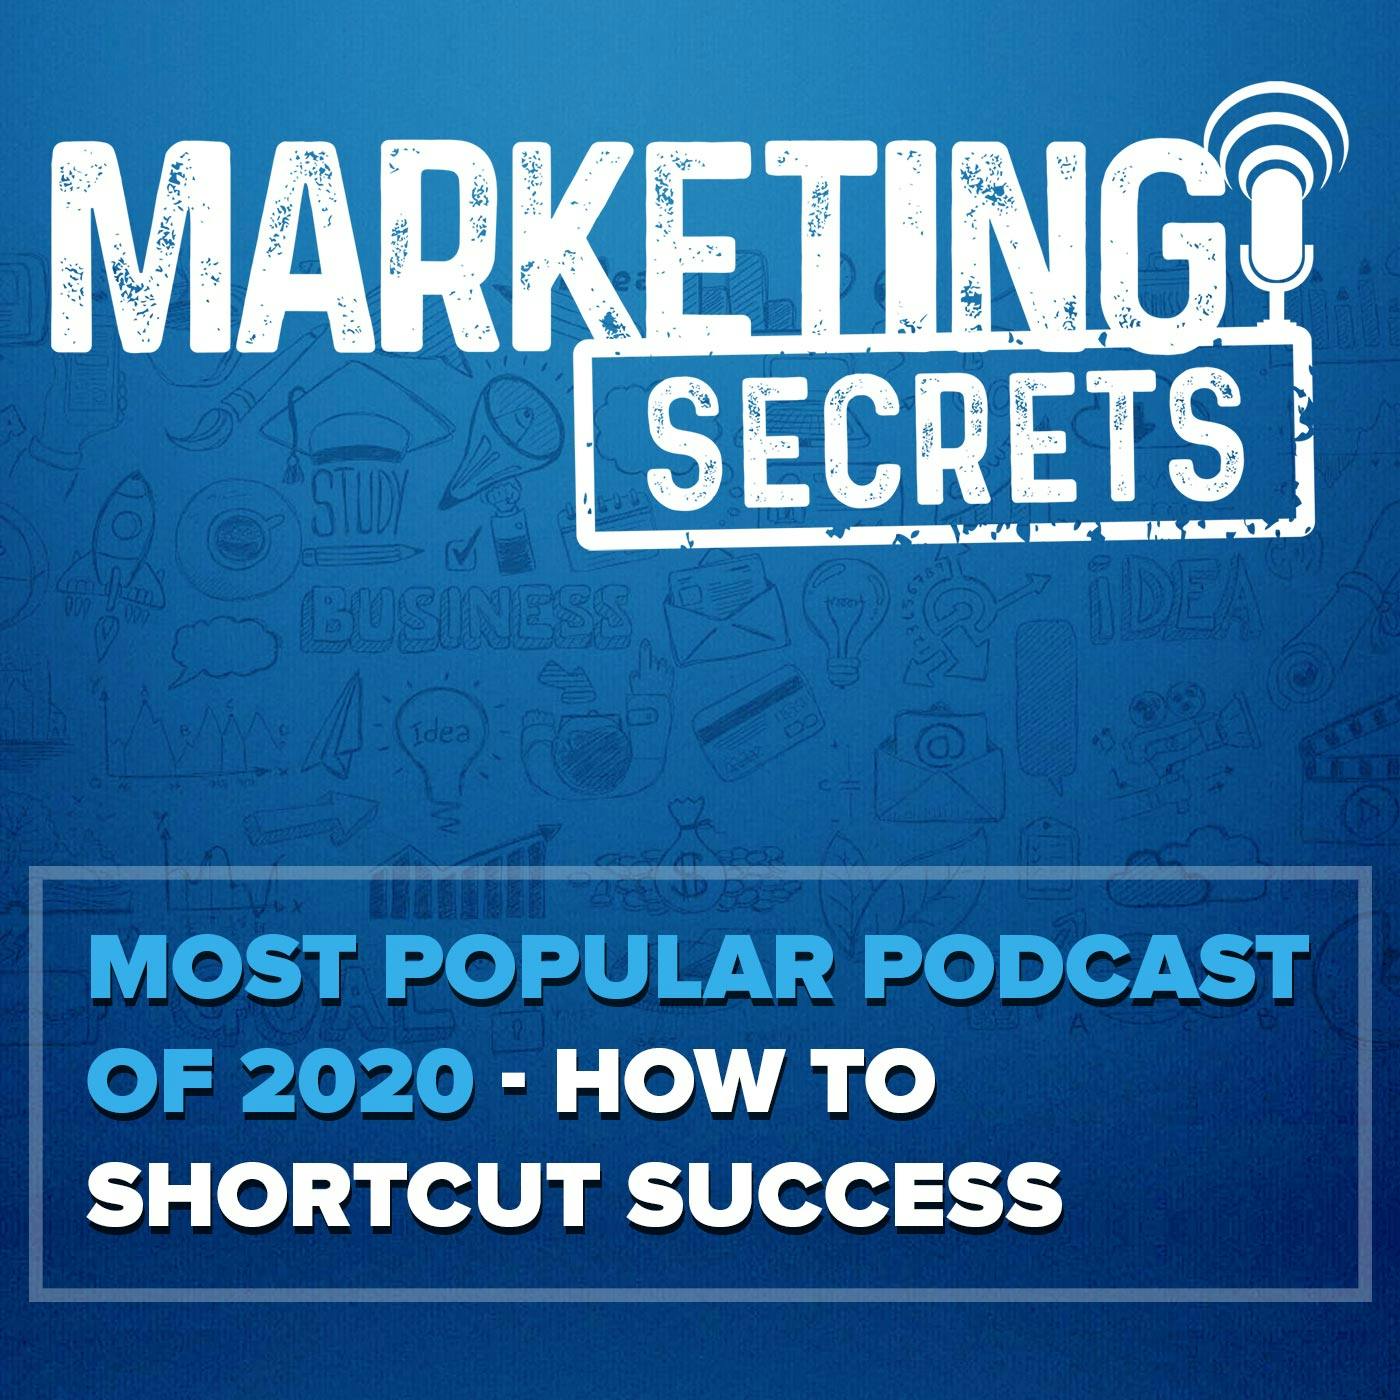 Most Popular Podcast of 2020 - How To Shortcut Success